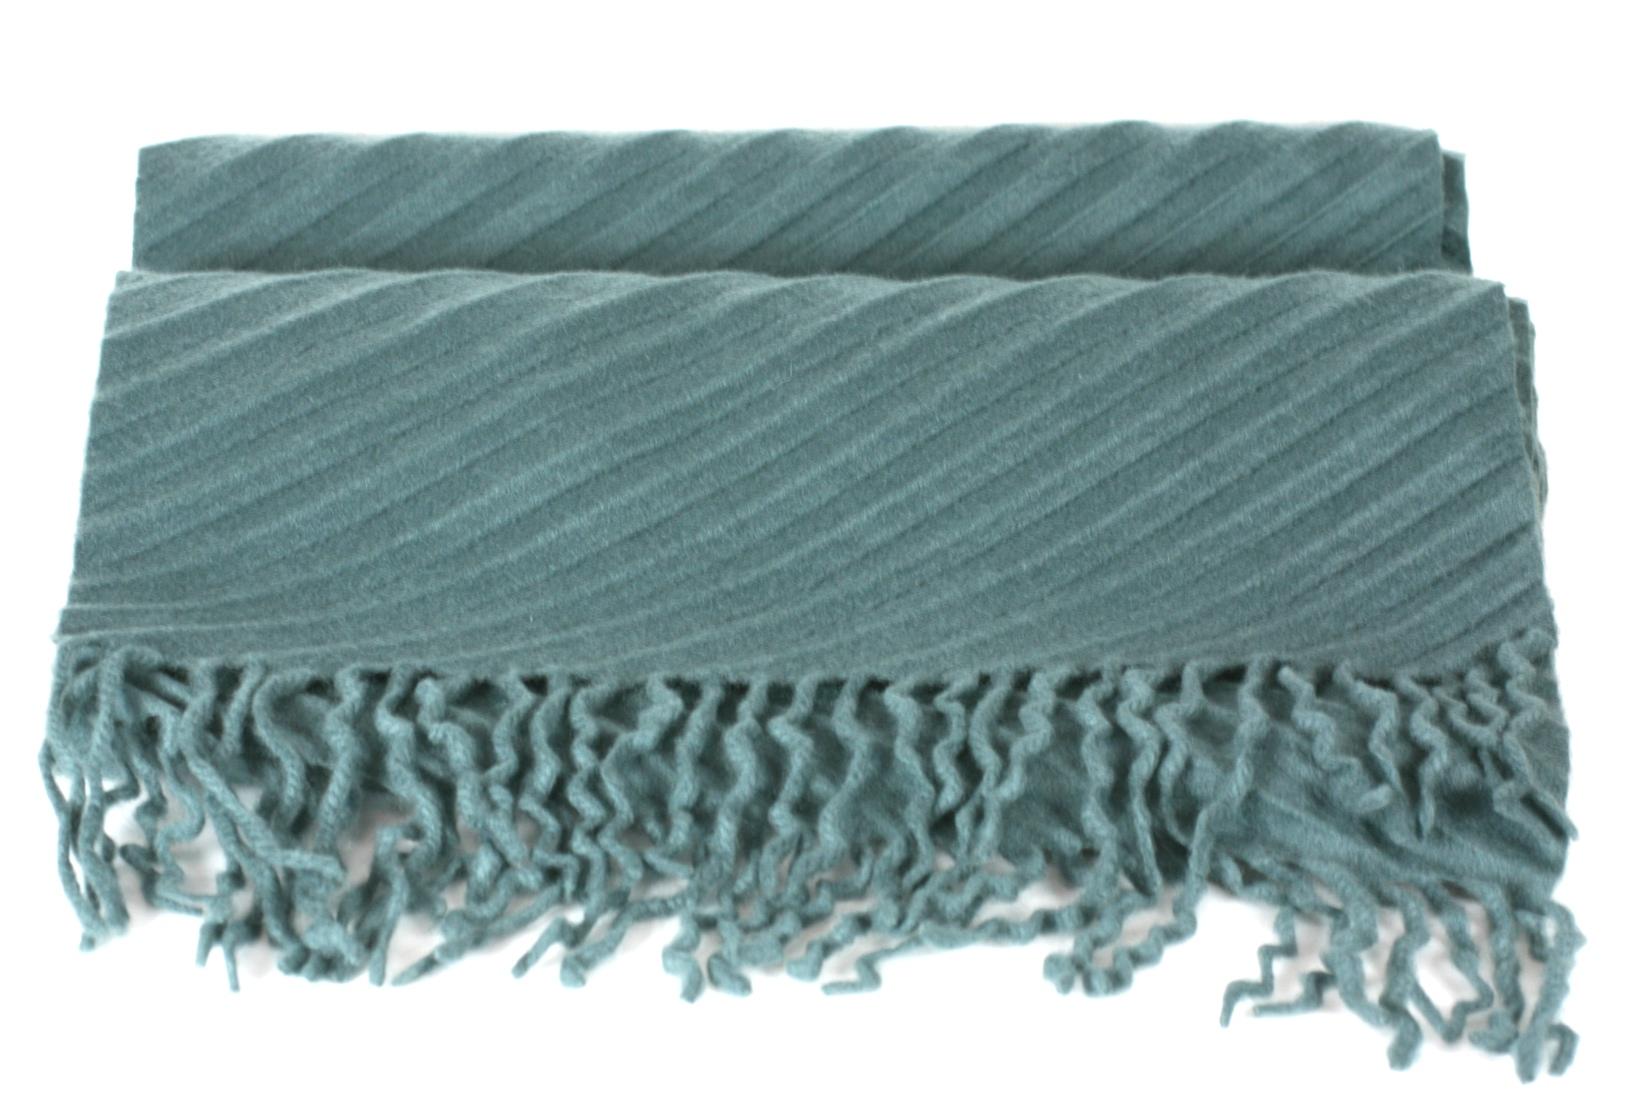 Holland and Holland Pleated Cashmere Scarf in petrol gray blue. Made in Italy, Large, luxurious wrapable size and unique texture, suitable for men or women.
72